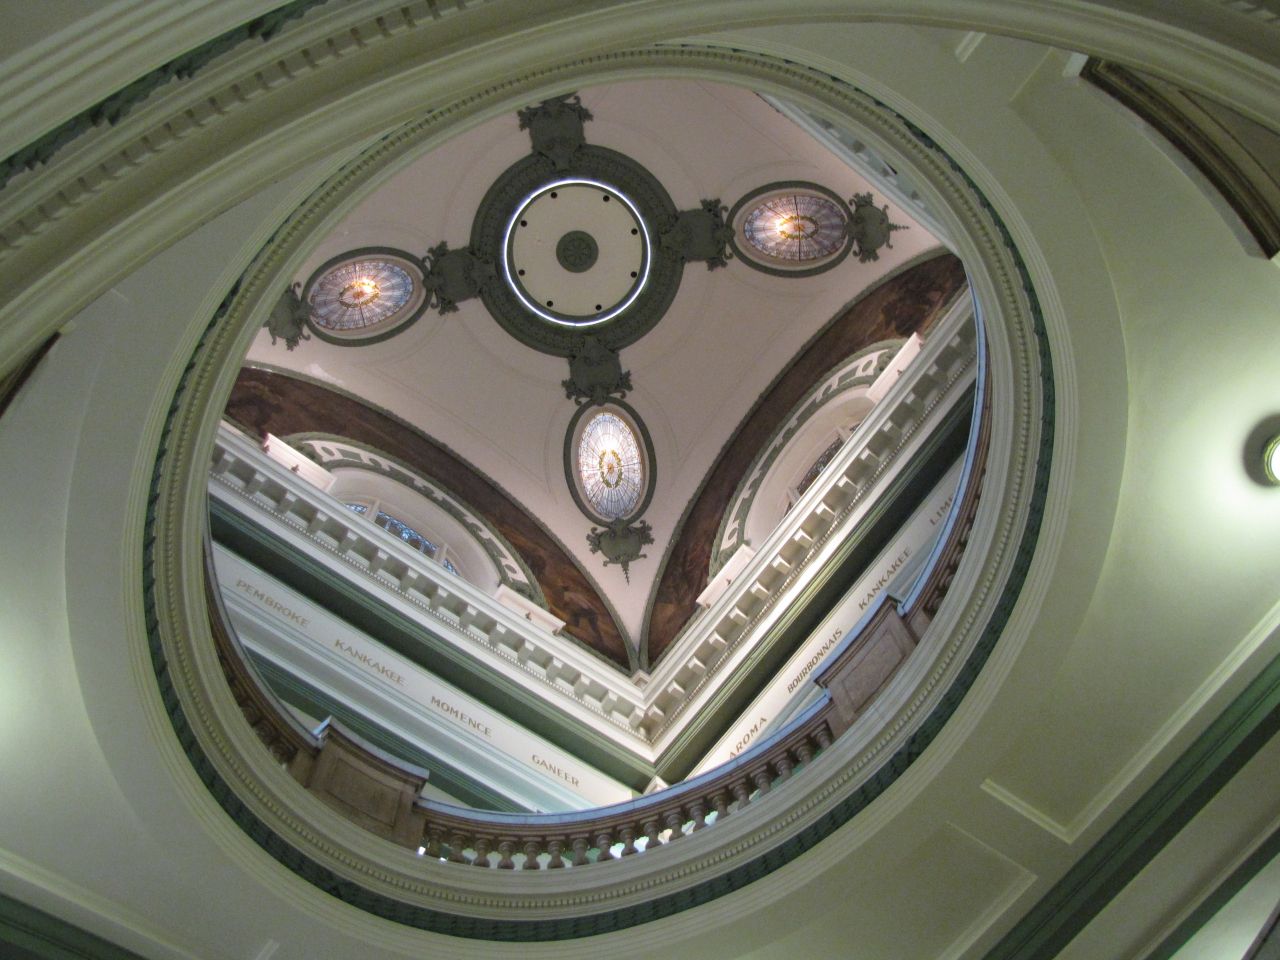 Looking up at the courthouse dome